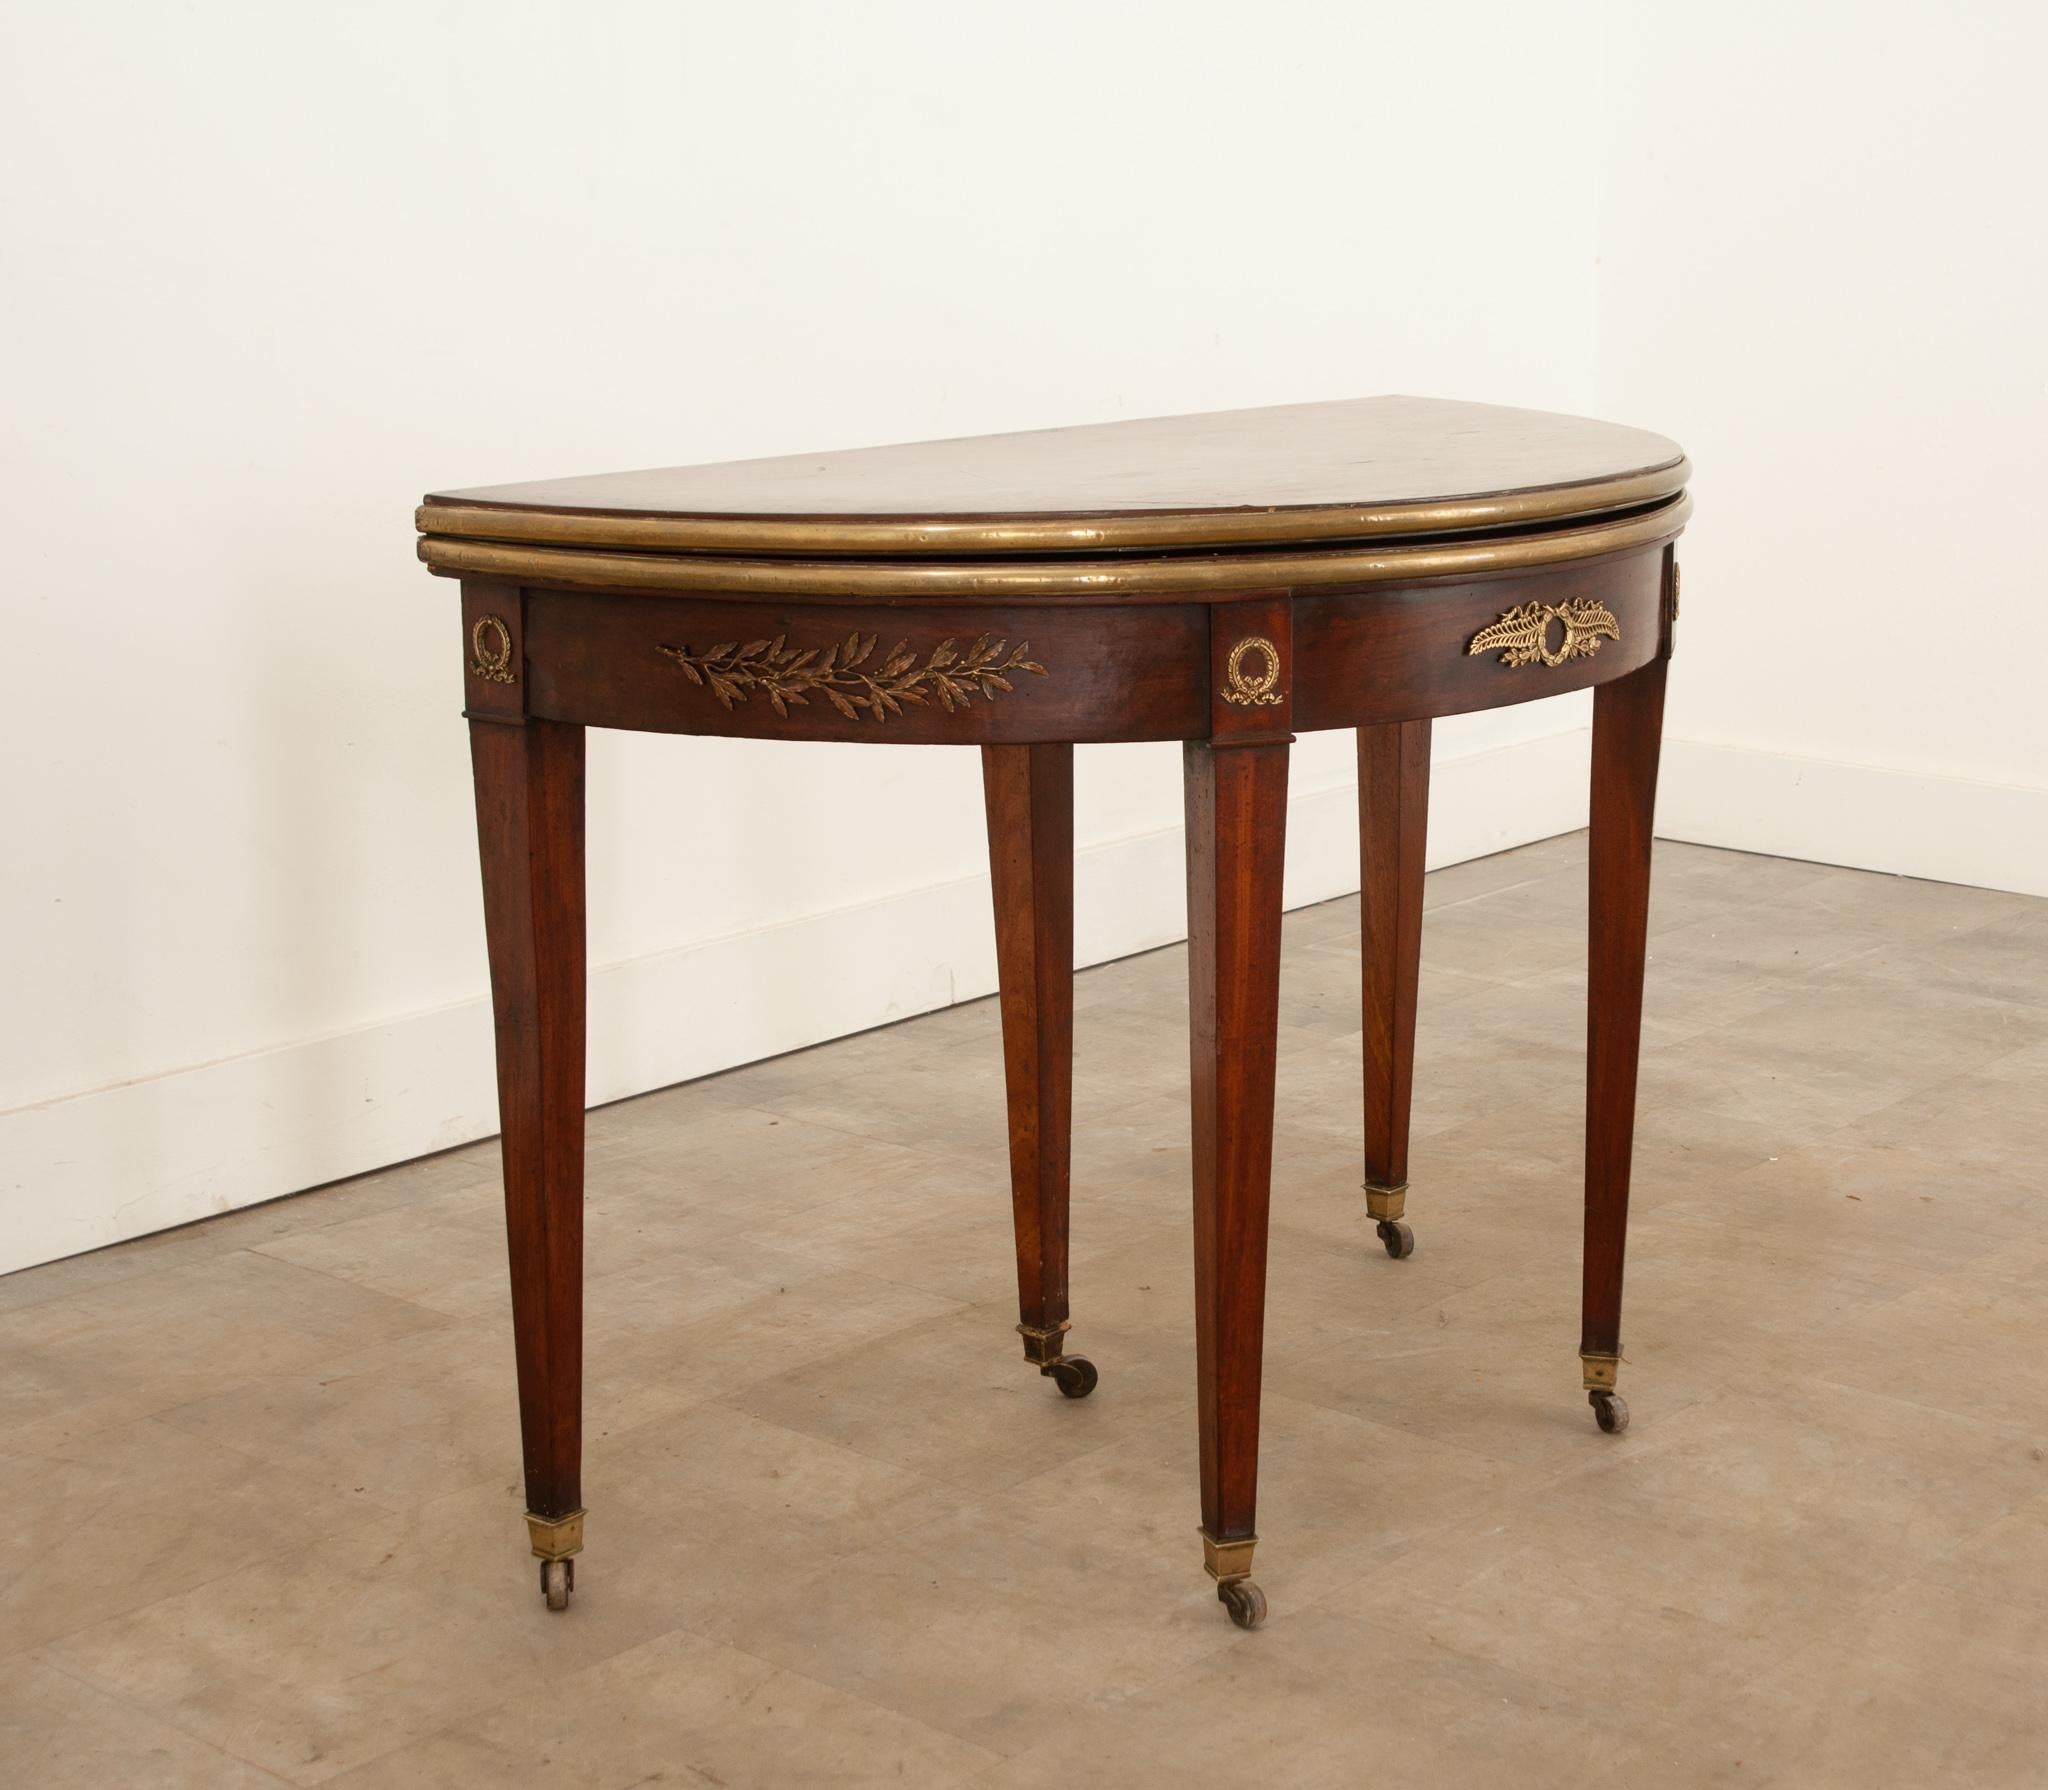 A convertible demilune console-to-game table - made in the Empire style - in 19th Century France. When closed, the table functions as a striking demilune console, bedecked in outstanding gilt brass ormolu. A drawer extends from the back of the